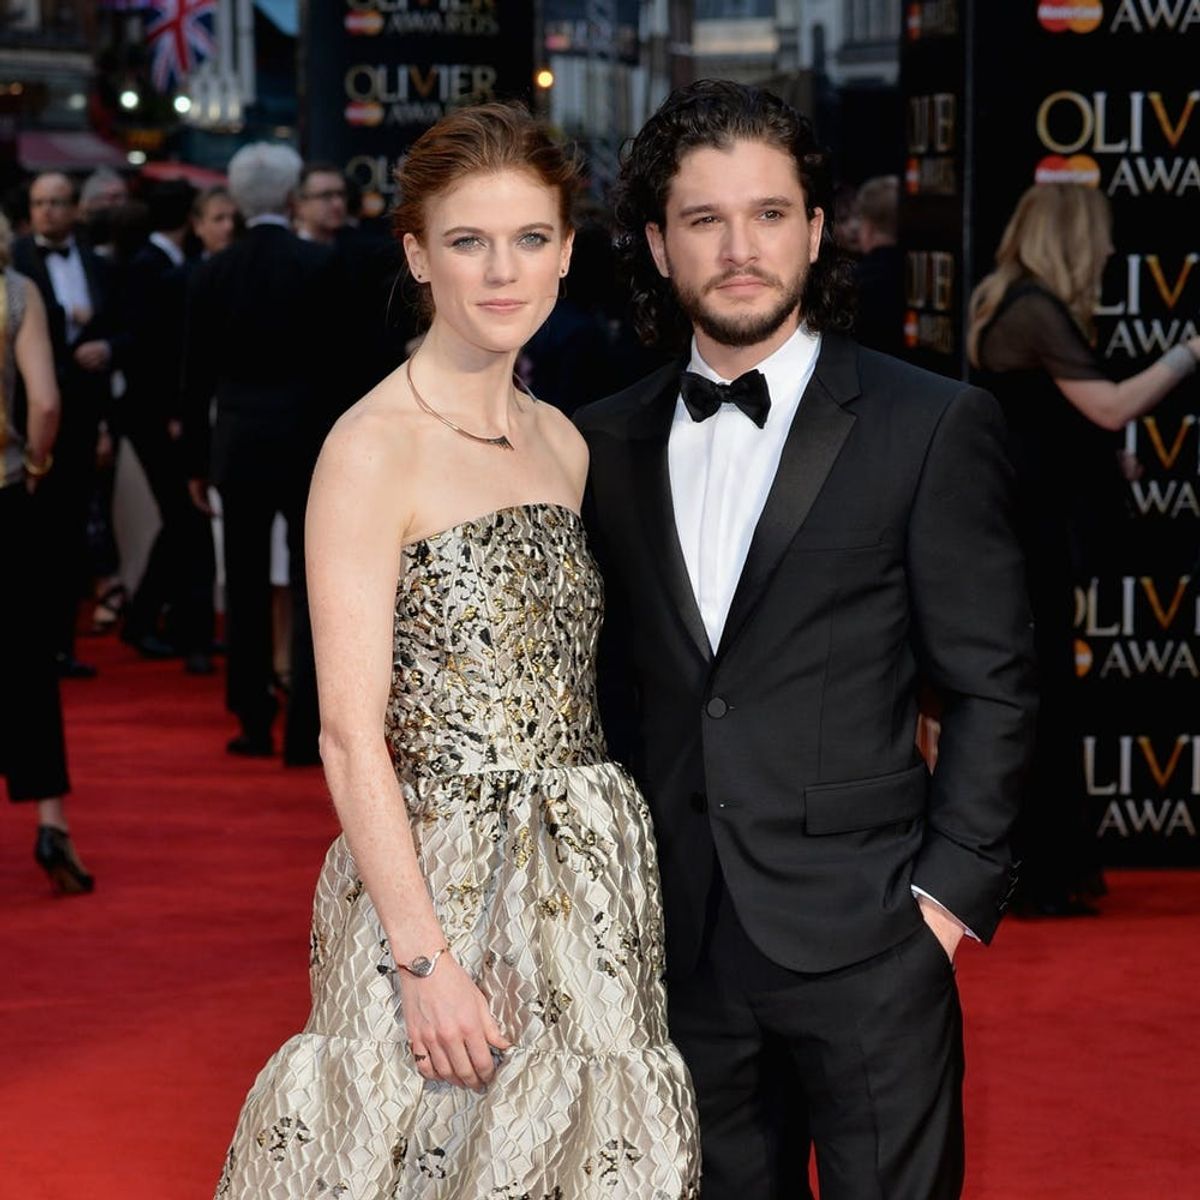 You’ll Swoon Hearing Kit Harington’s Story About Falling In Love With Rose Leslie